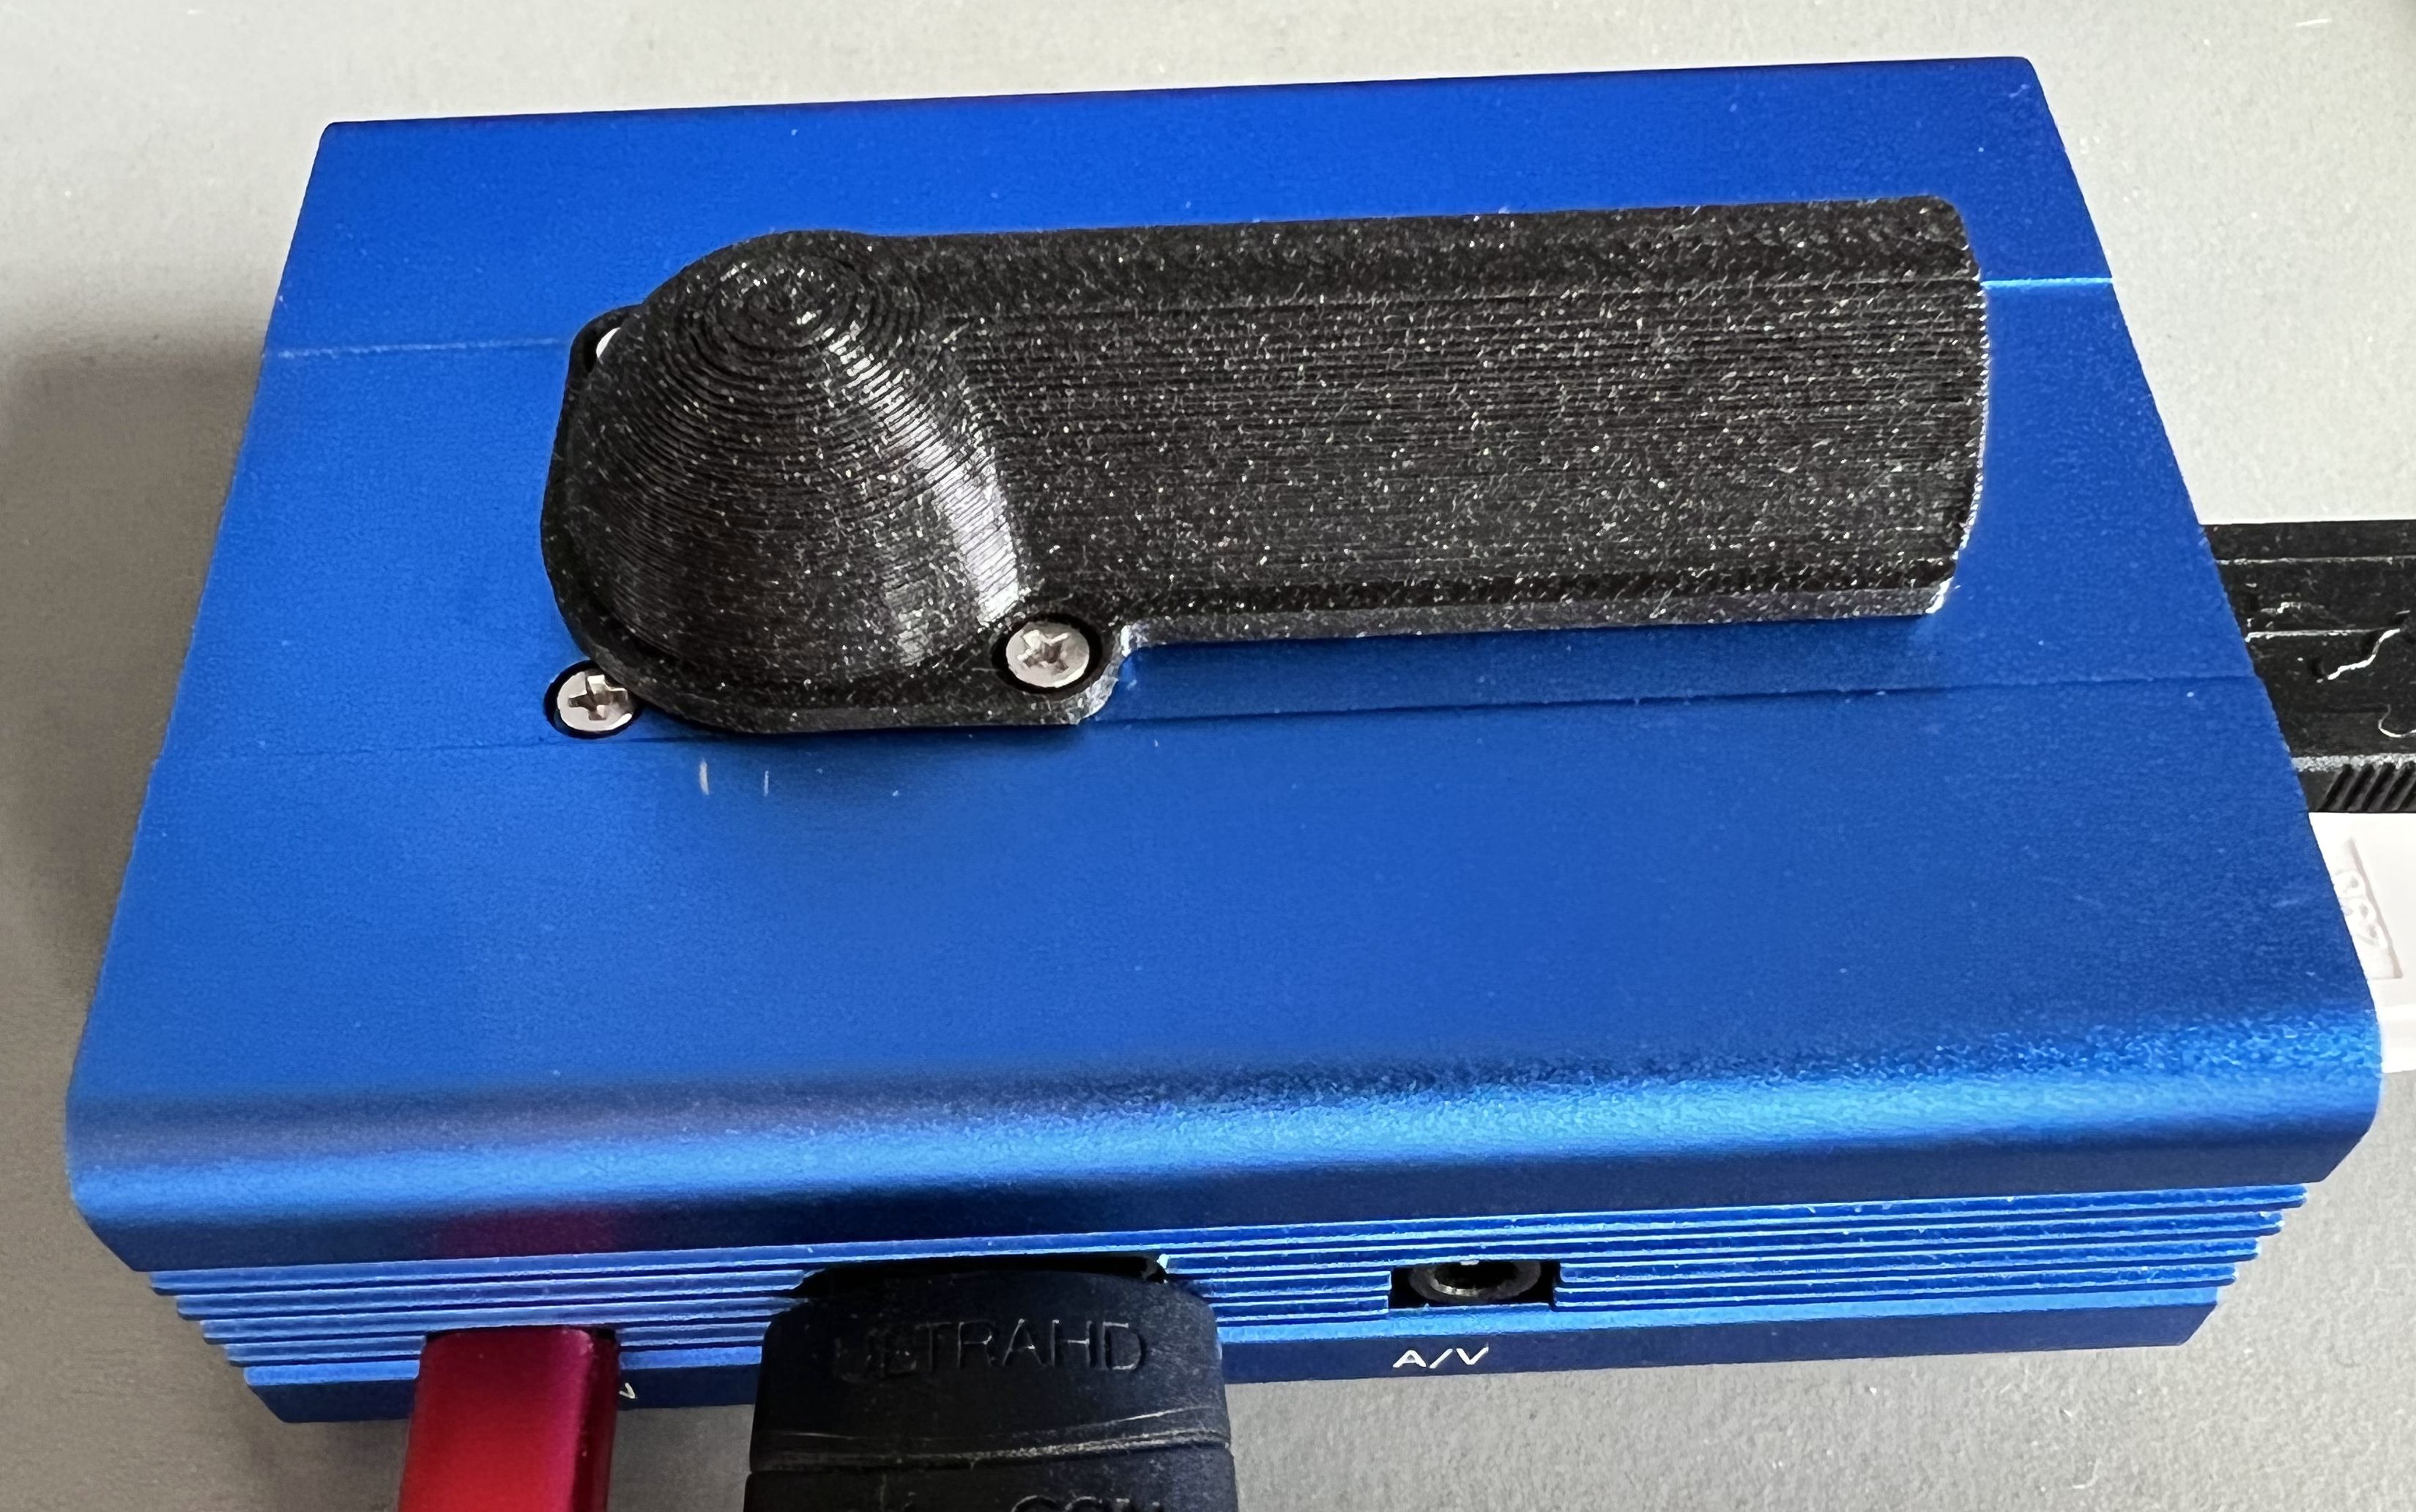 25mm fan cover for Raspberry Pi cases